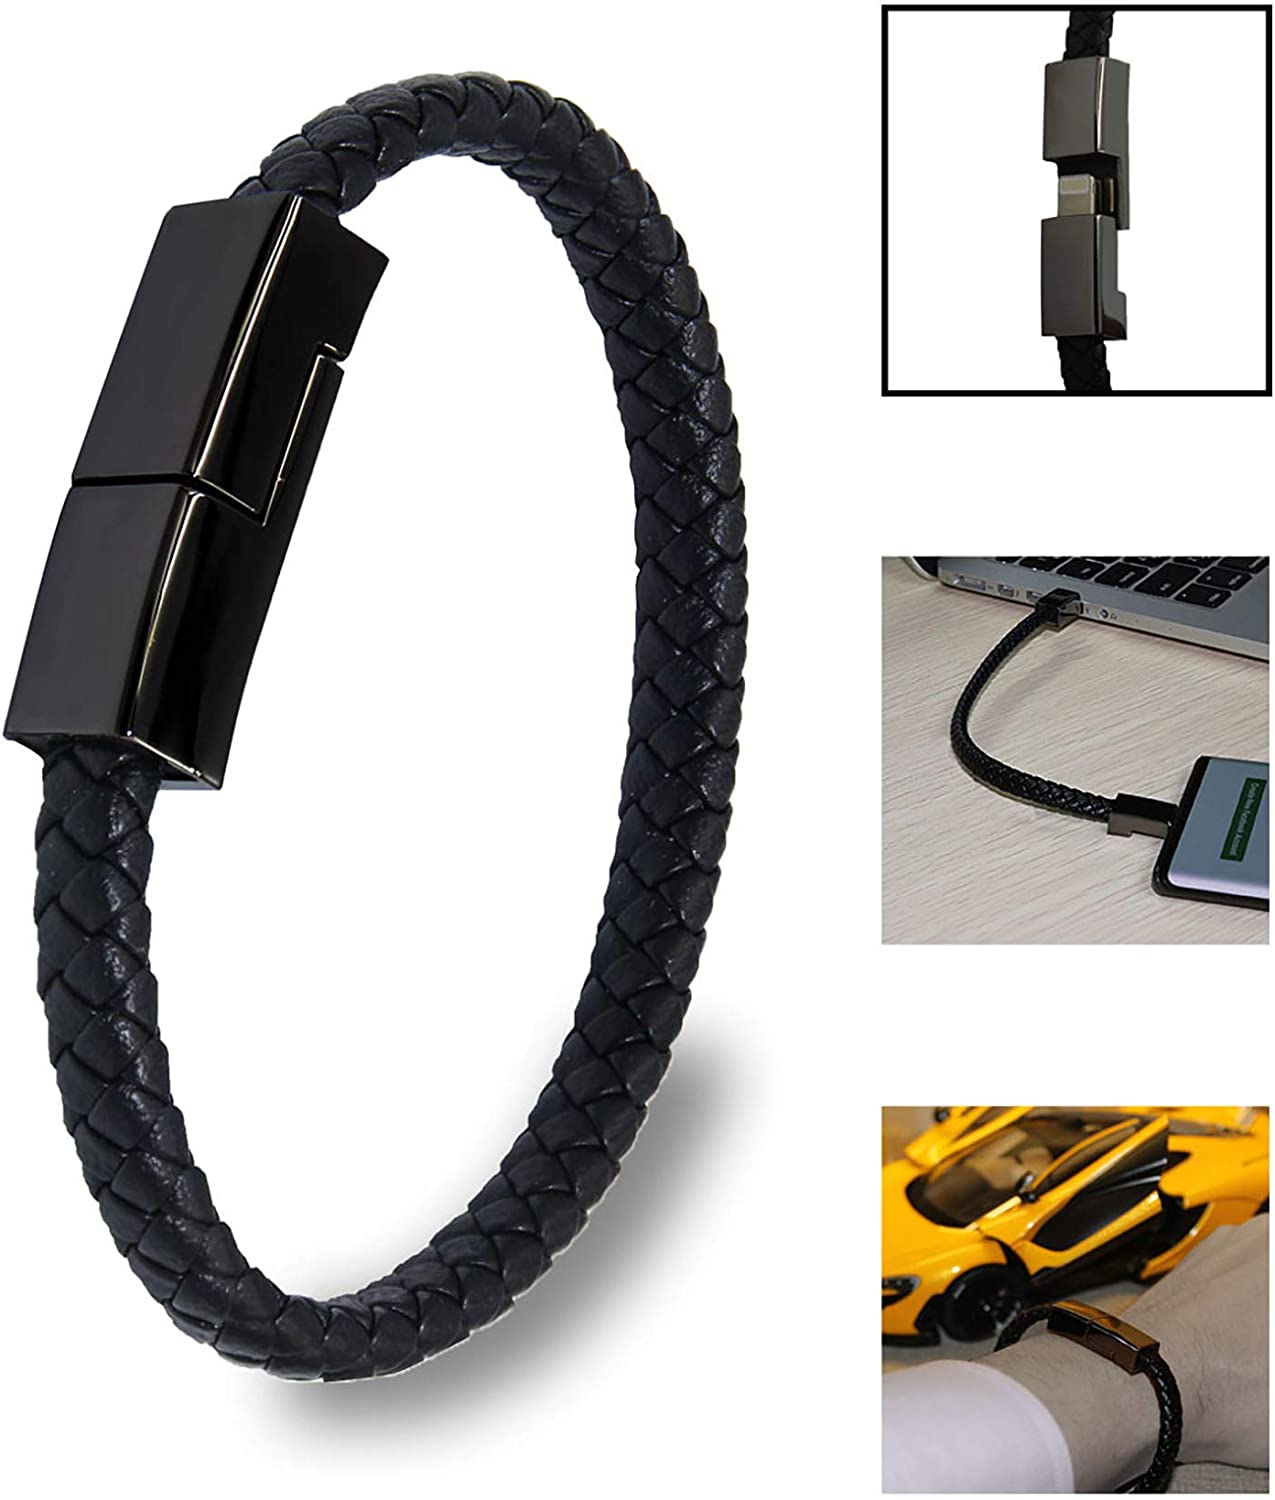 Wholesale Portable Charger Cord Cable USB Charging Cable Bracelet Charger  Cable for Android Type C Phone From malibabacom